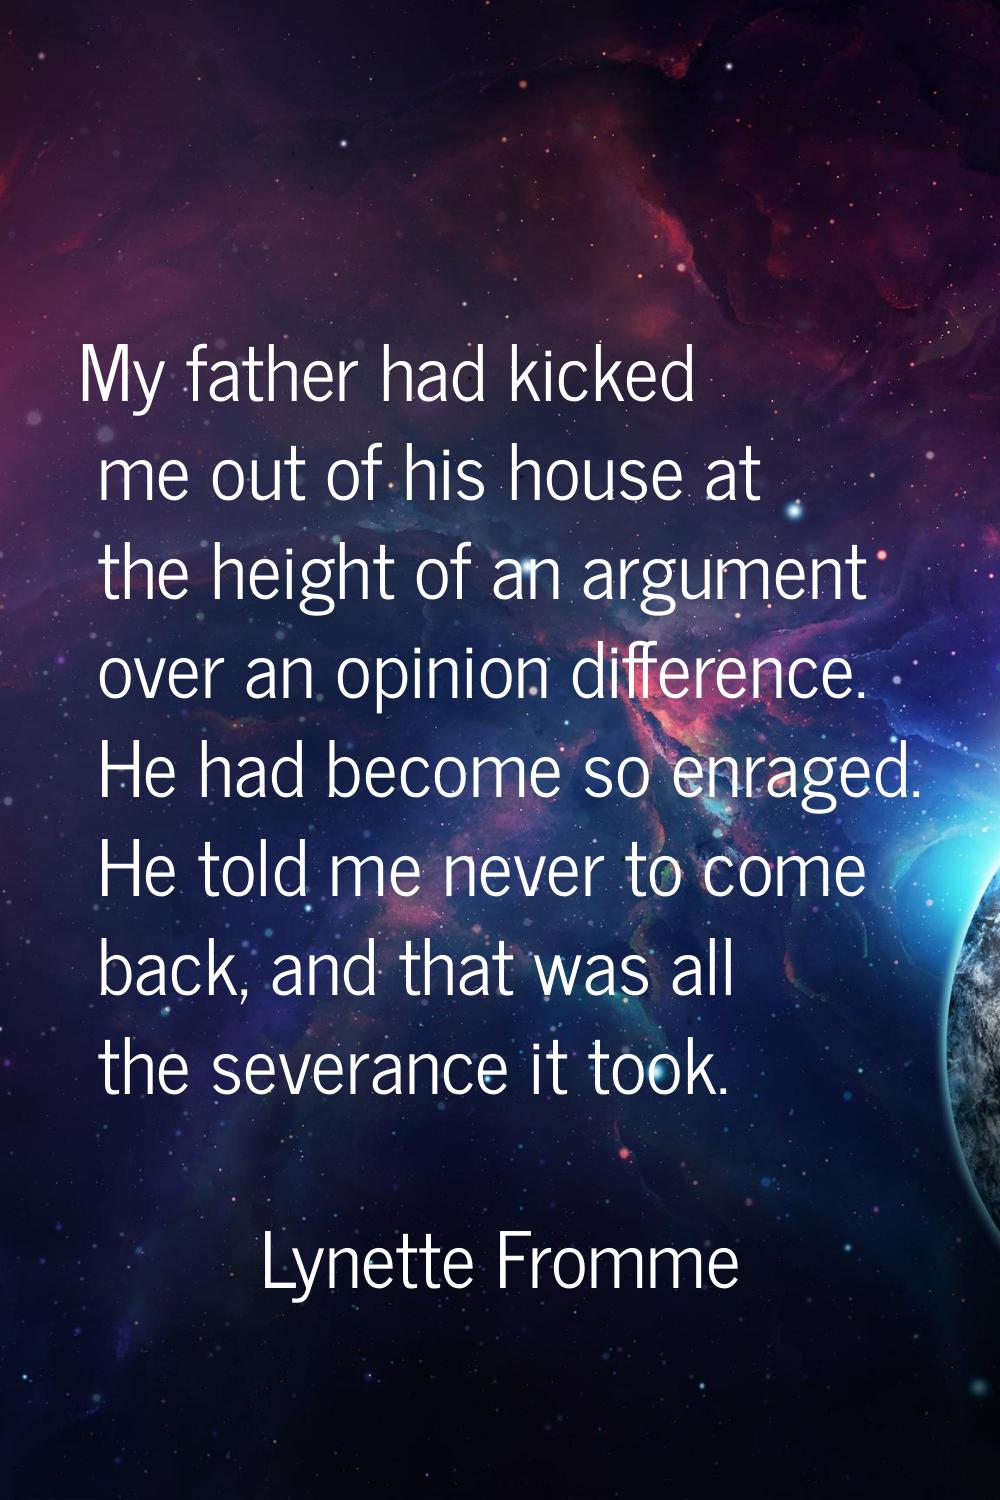 My father had kicked me out of his house at the height of an argument over an opinion difference. H